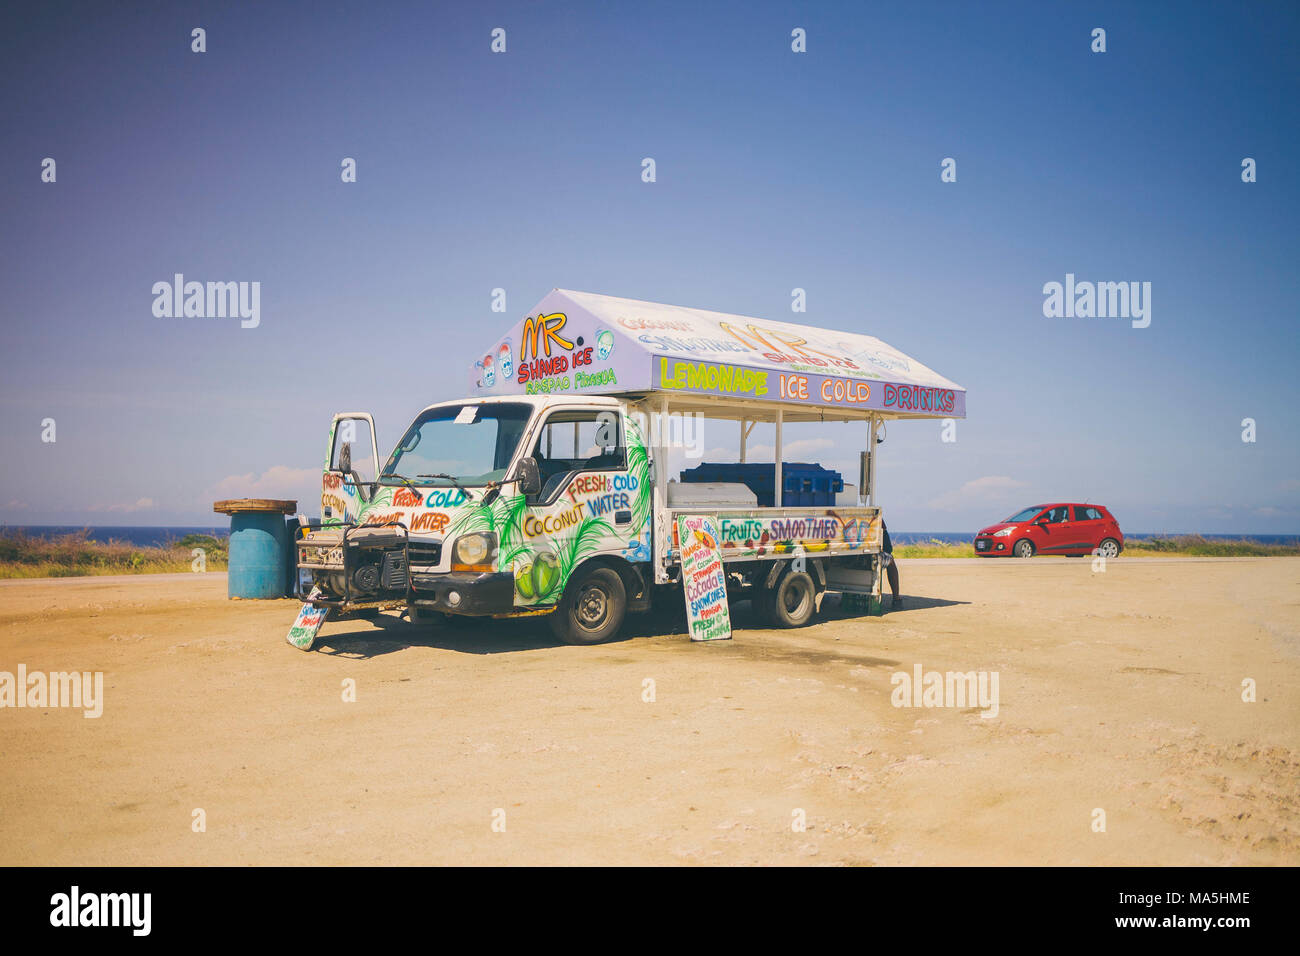 beverages and food truck in oranjestad, aruba in california lighthouse Stock Photo